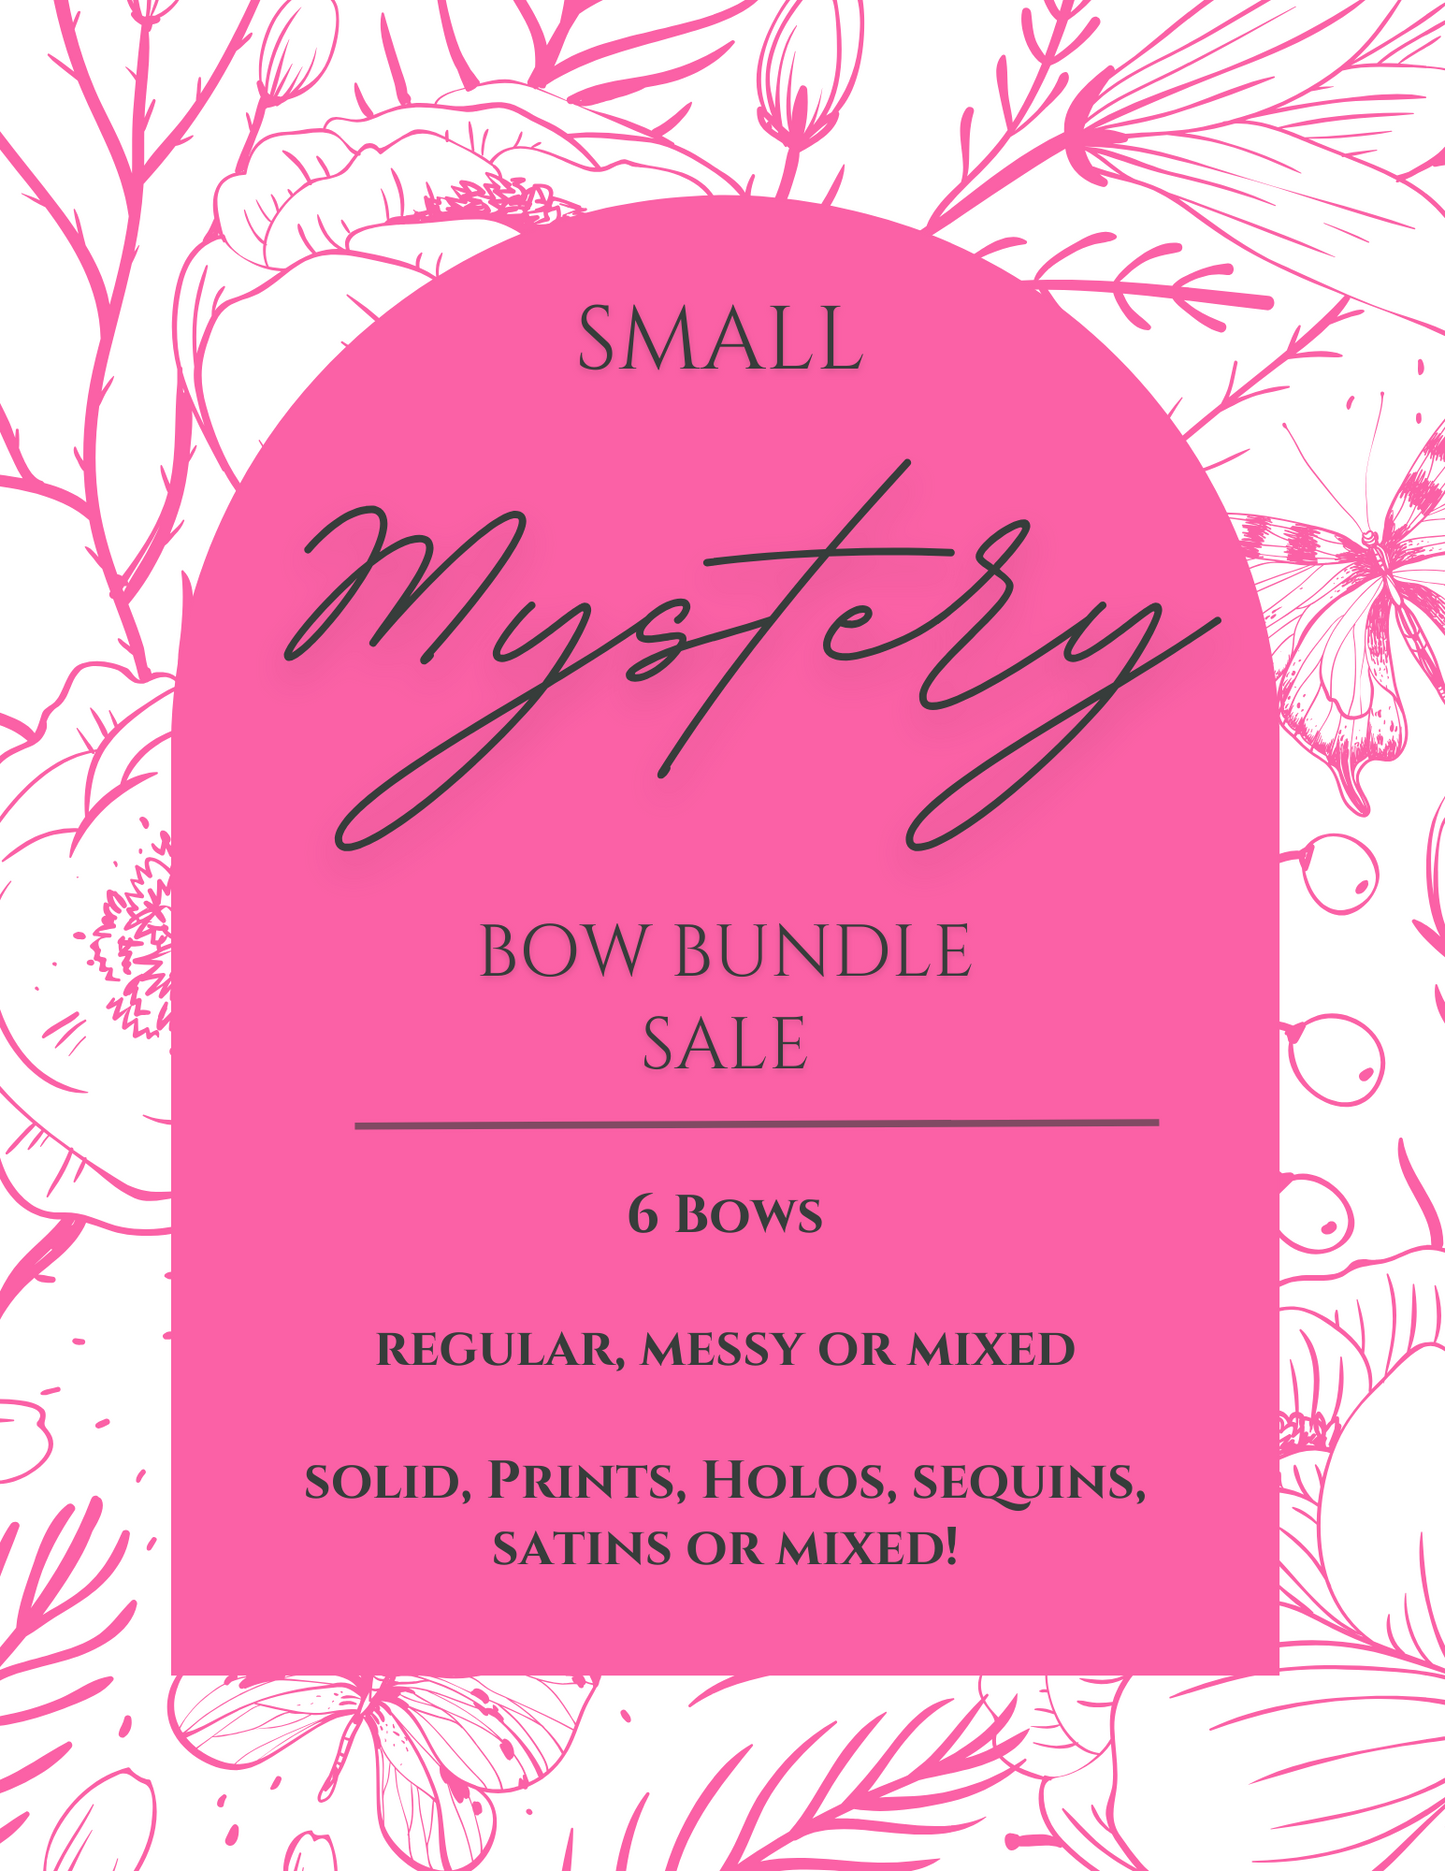 Small Mystery Bow Bundle Sale!